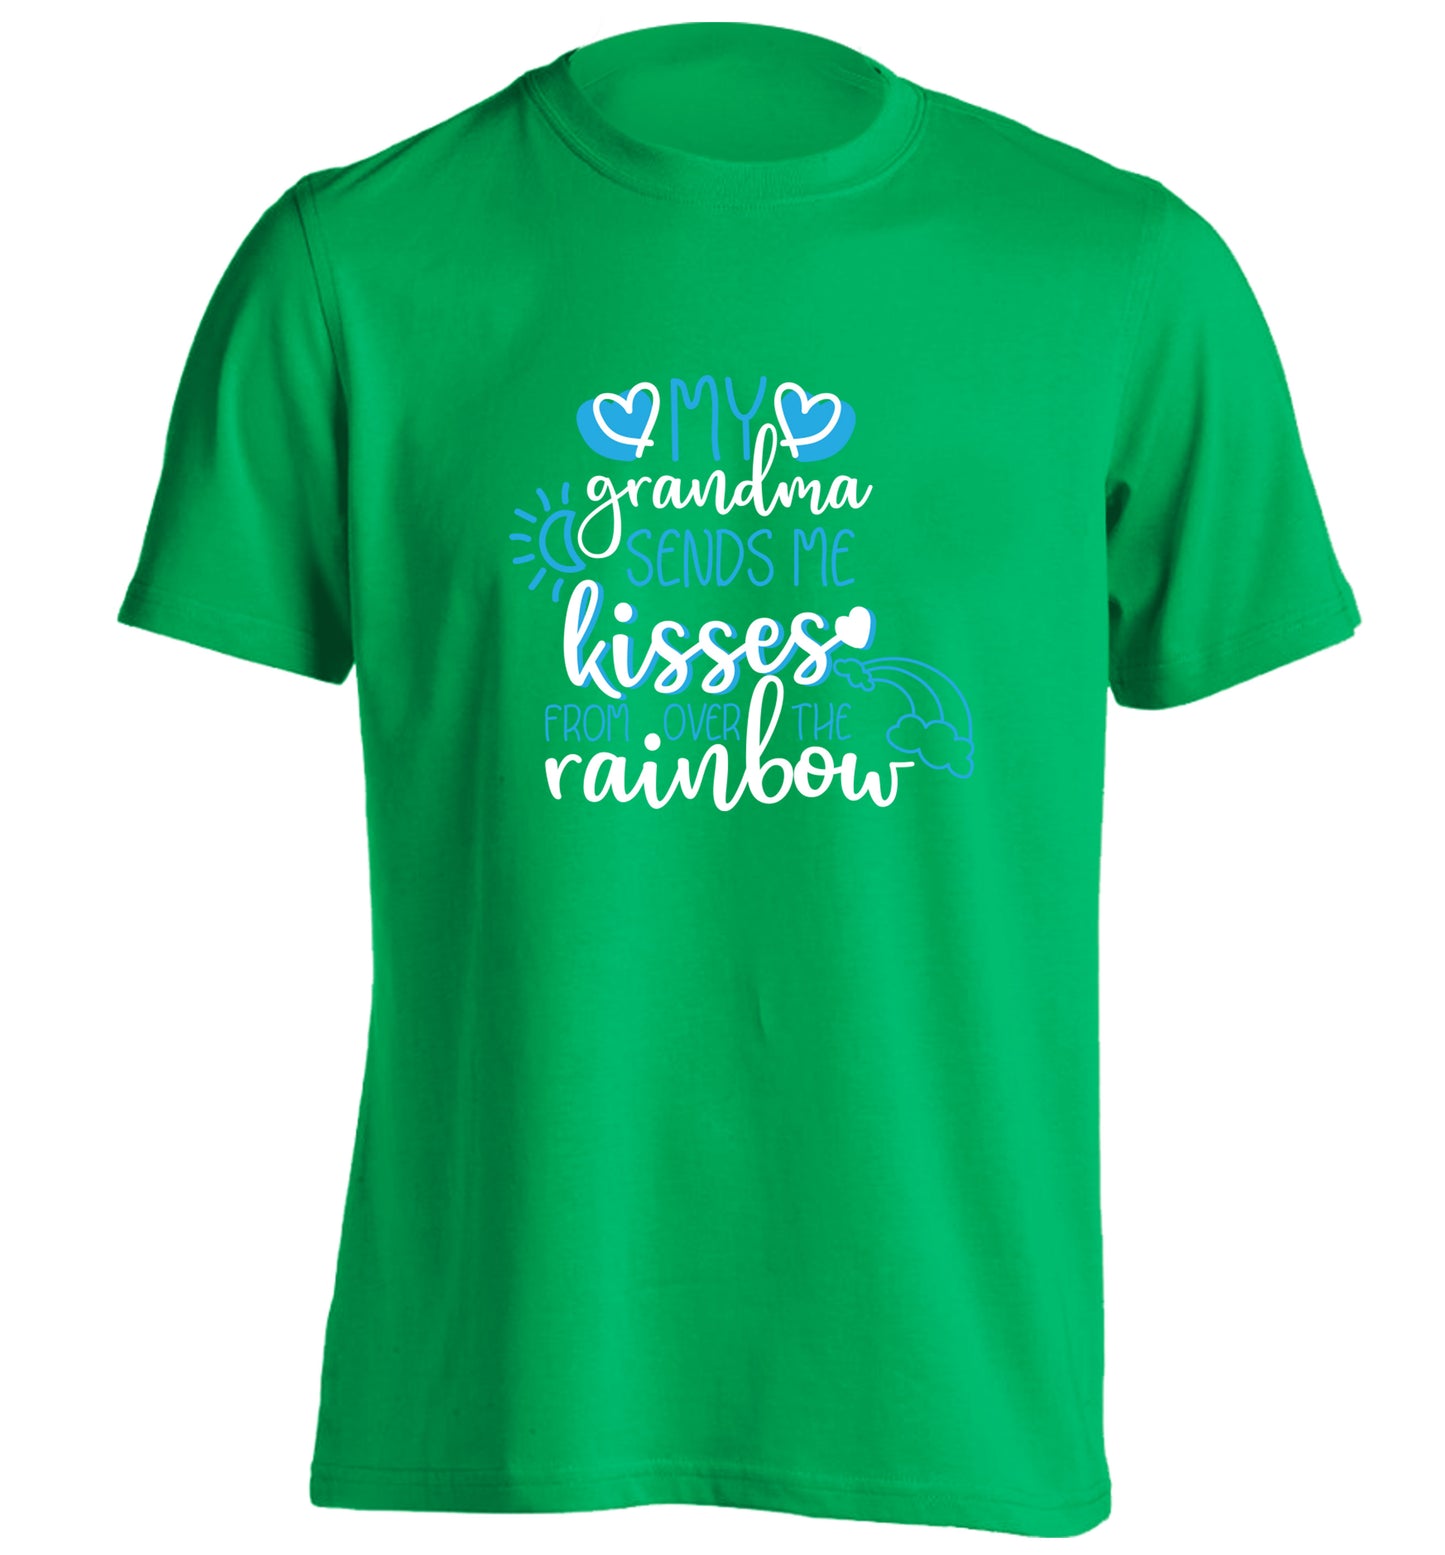 My grandma sends me kisses from over the rainbow adults unisex green Tshirt 2XL